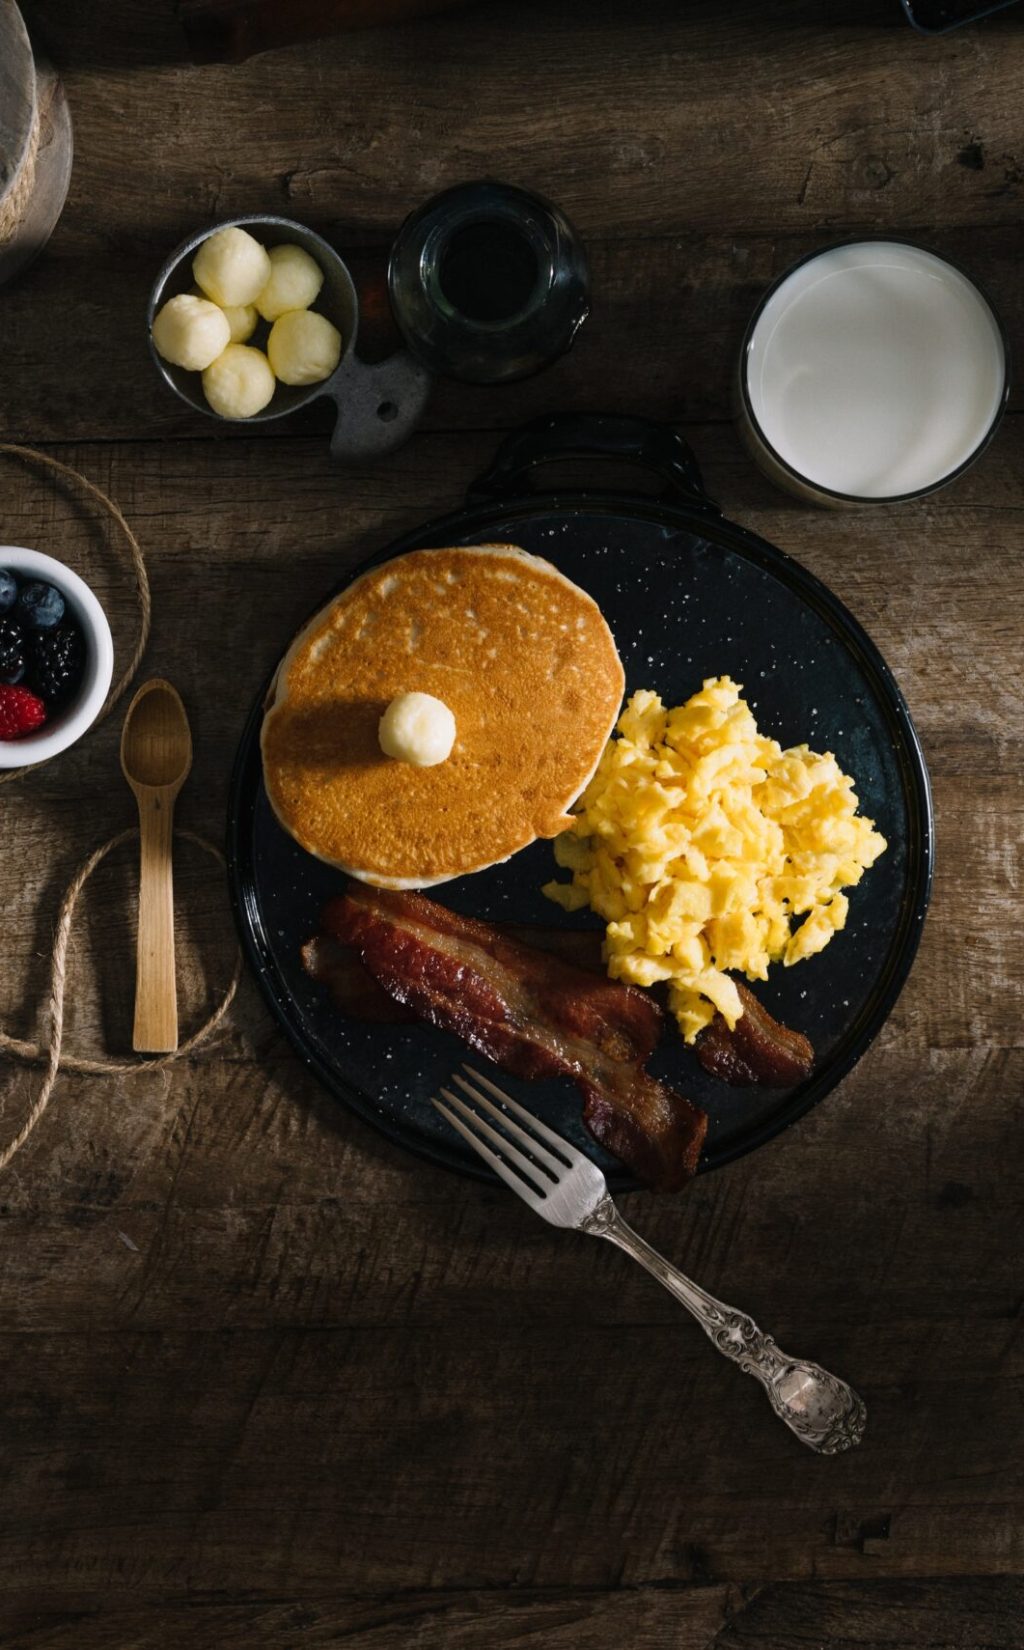 Rustic breakfast tablescape with pancakes, eggs, and bacon. Original public domain image from Wikimedia Commons